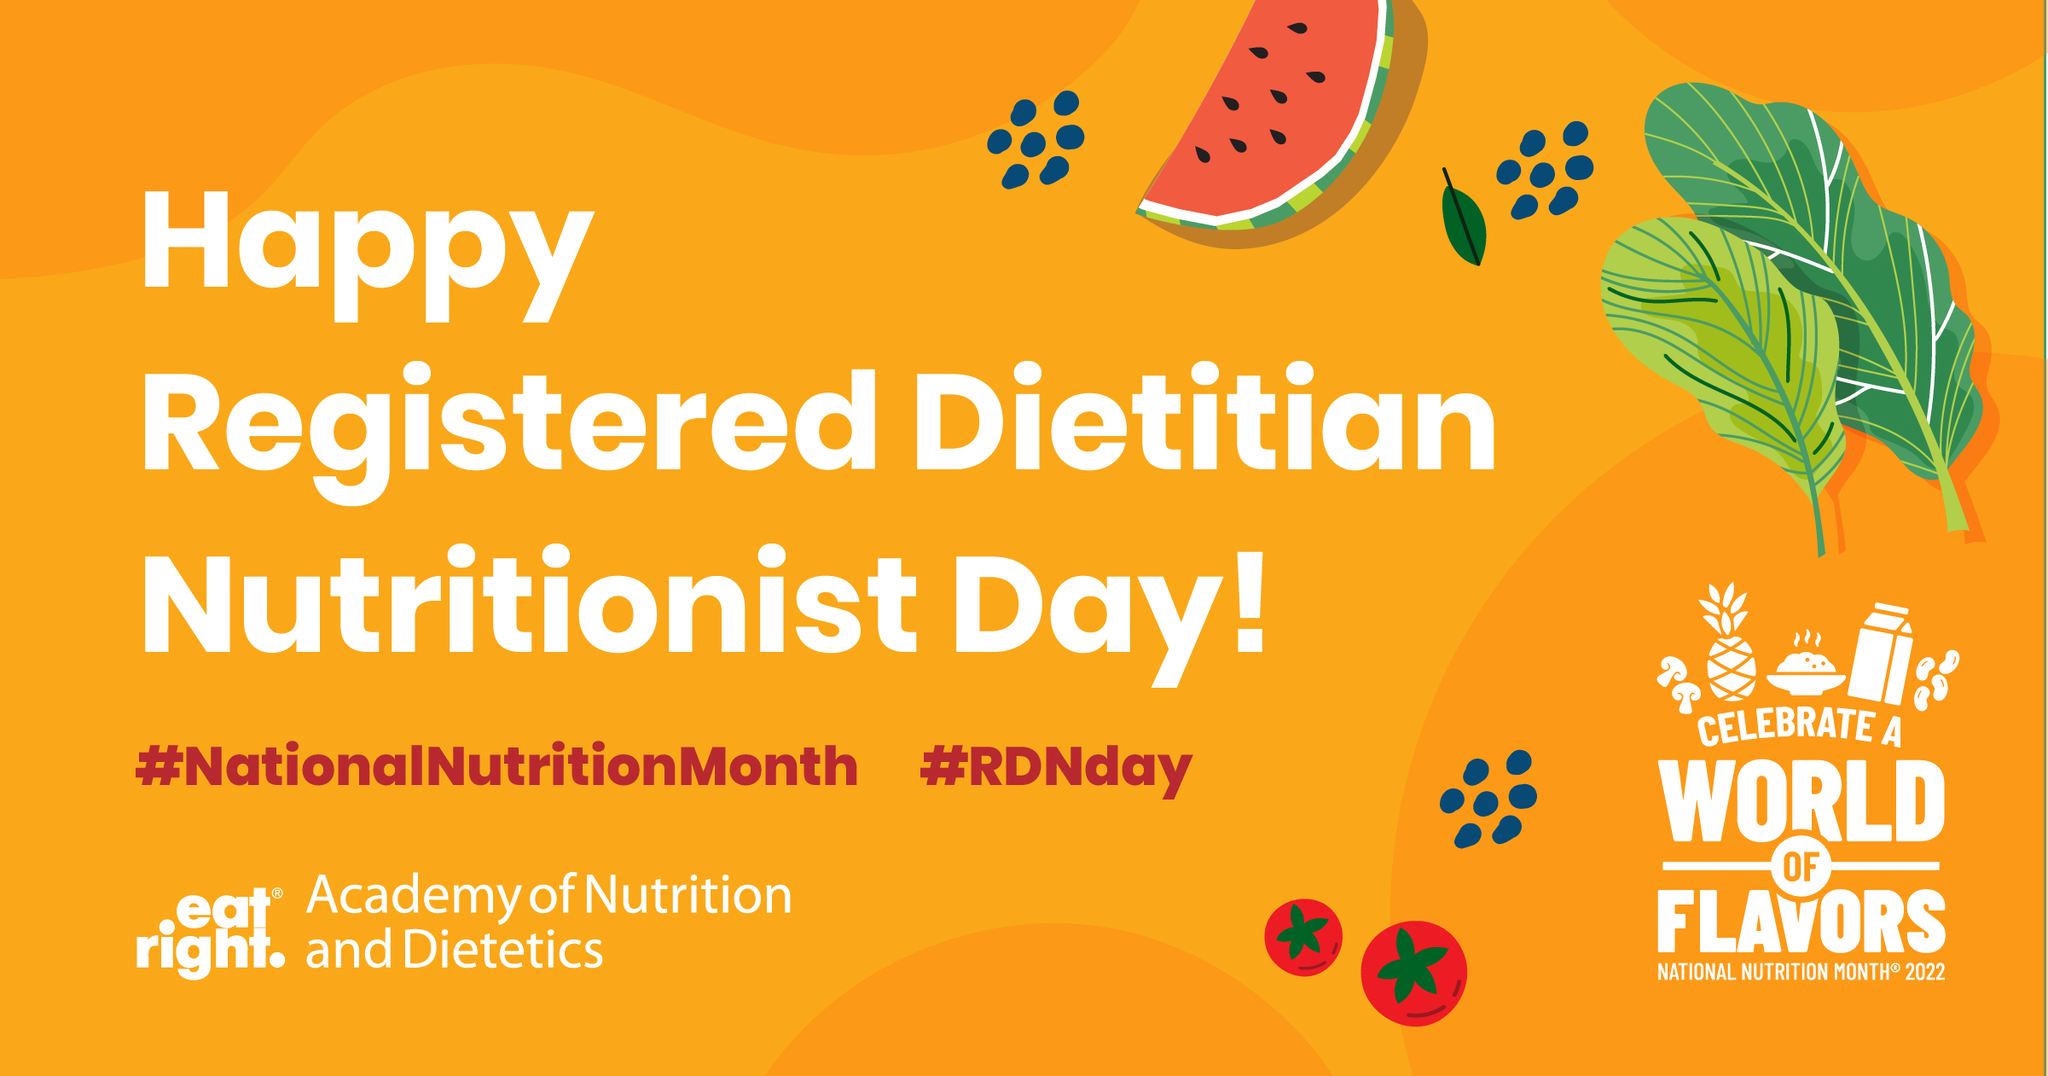 Happy Registered Dietitian Nutritionist Day! Featured Image